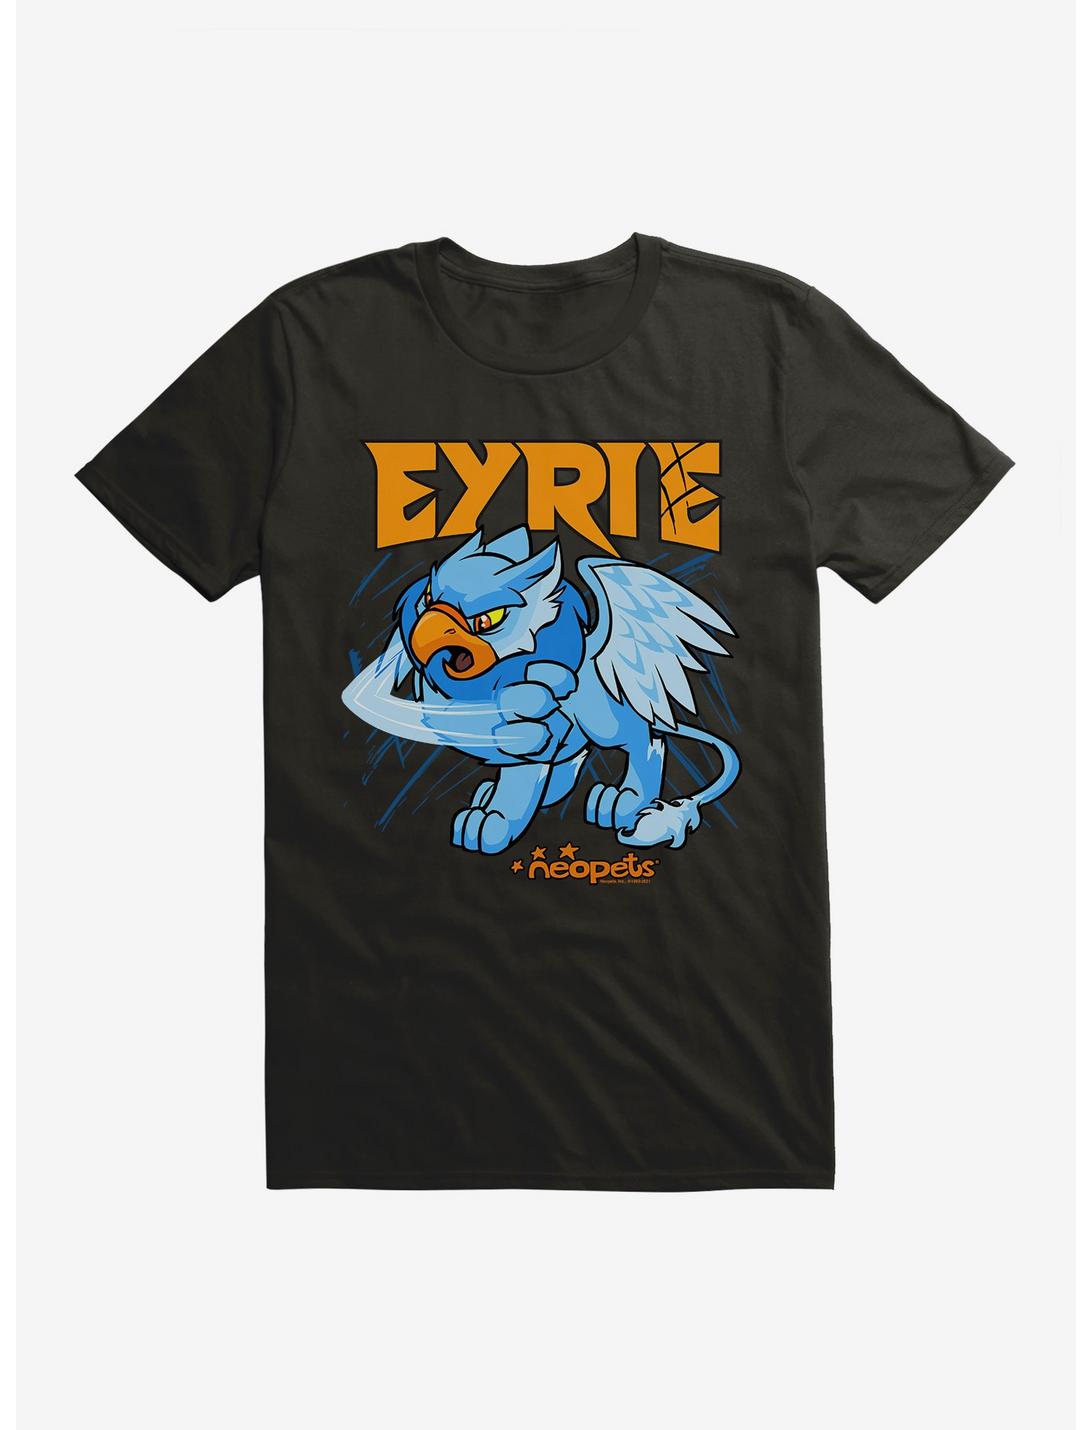 Neopets Eyrie T-Shirt, BLACK, hi-res